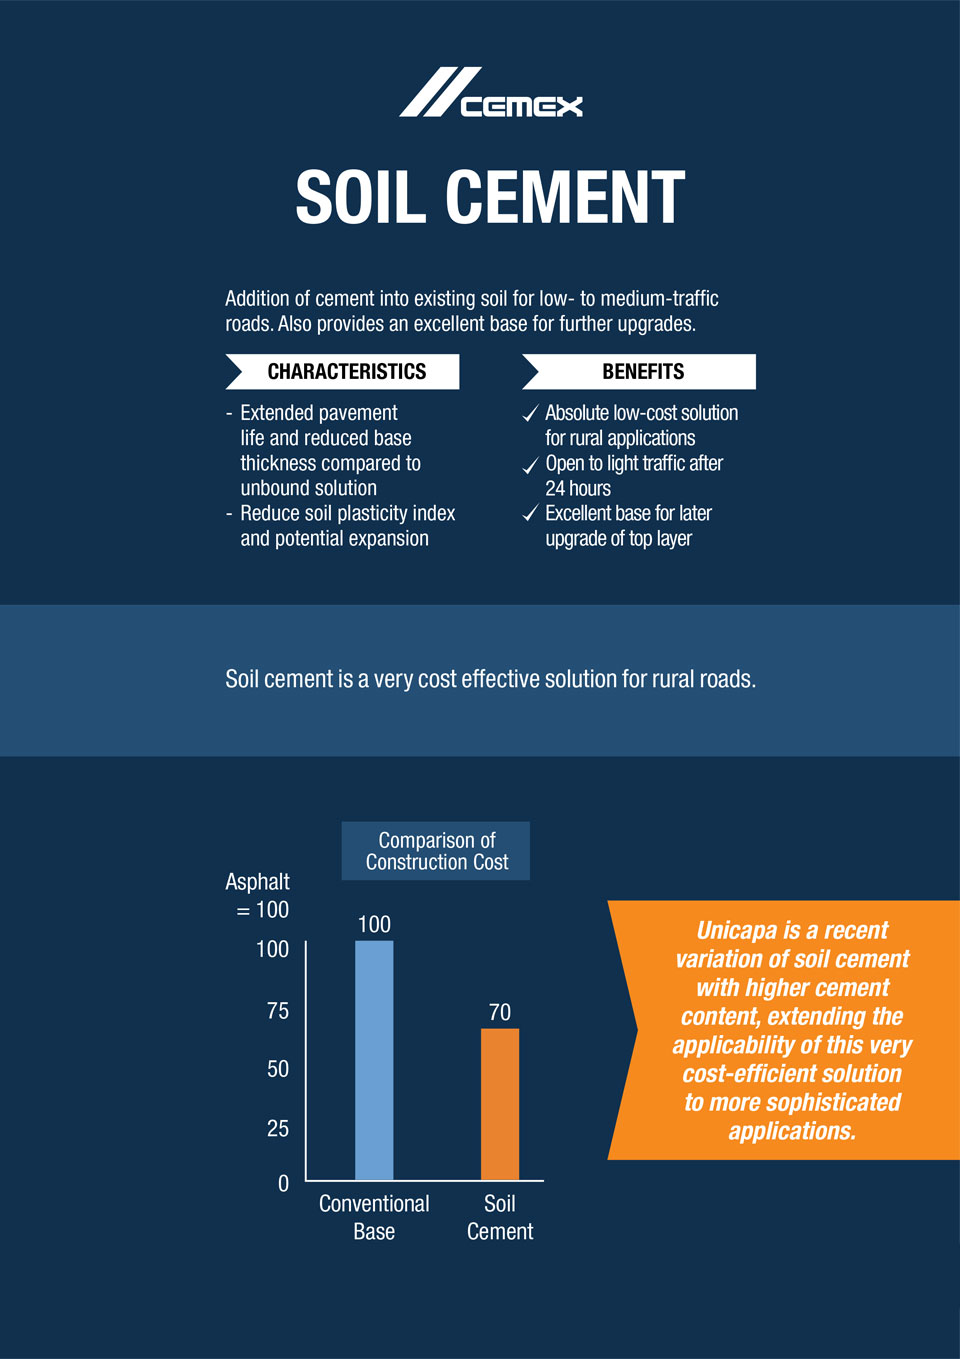 the image shows characteristics and benefits of soil cement